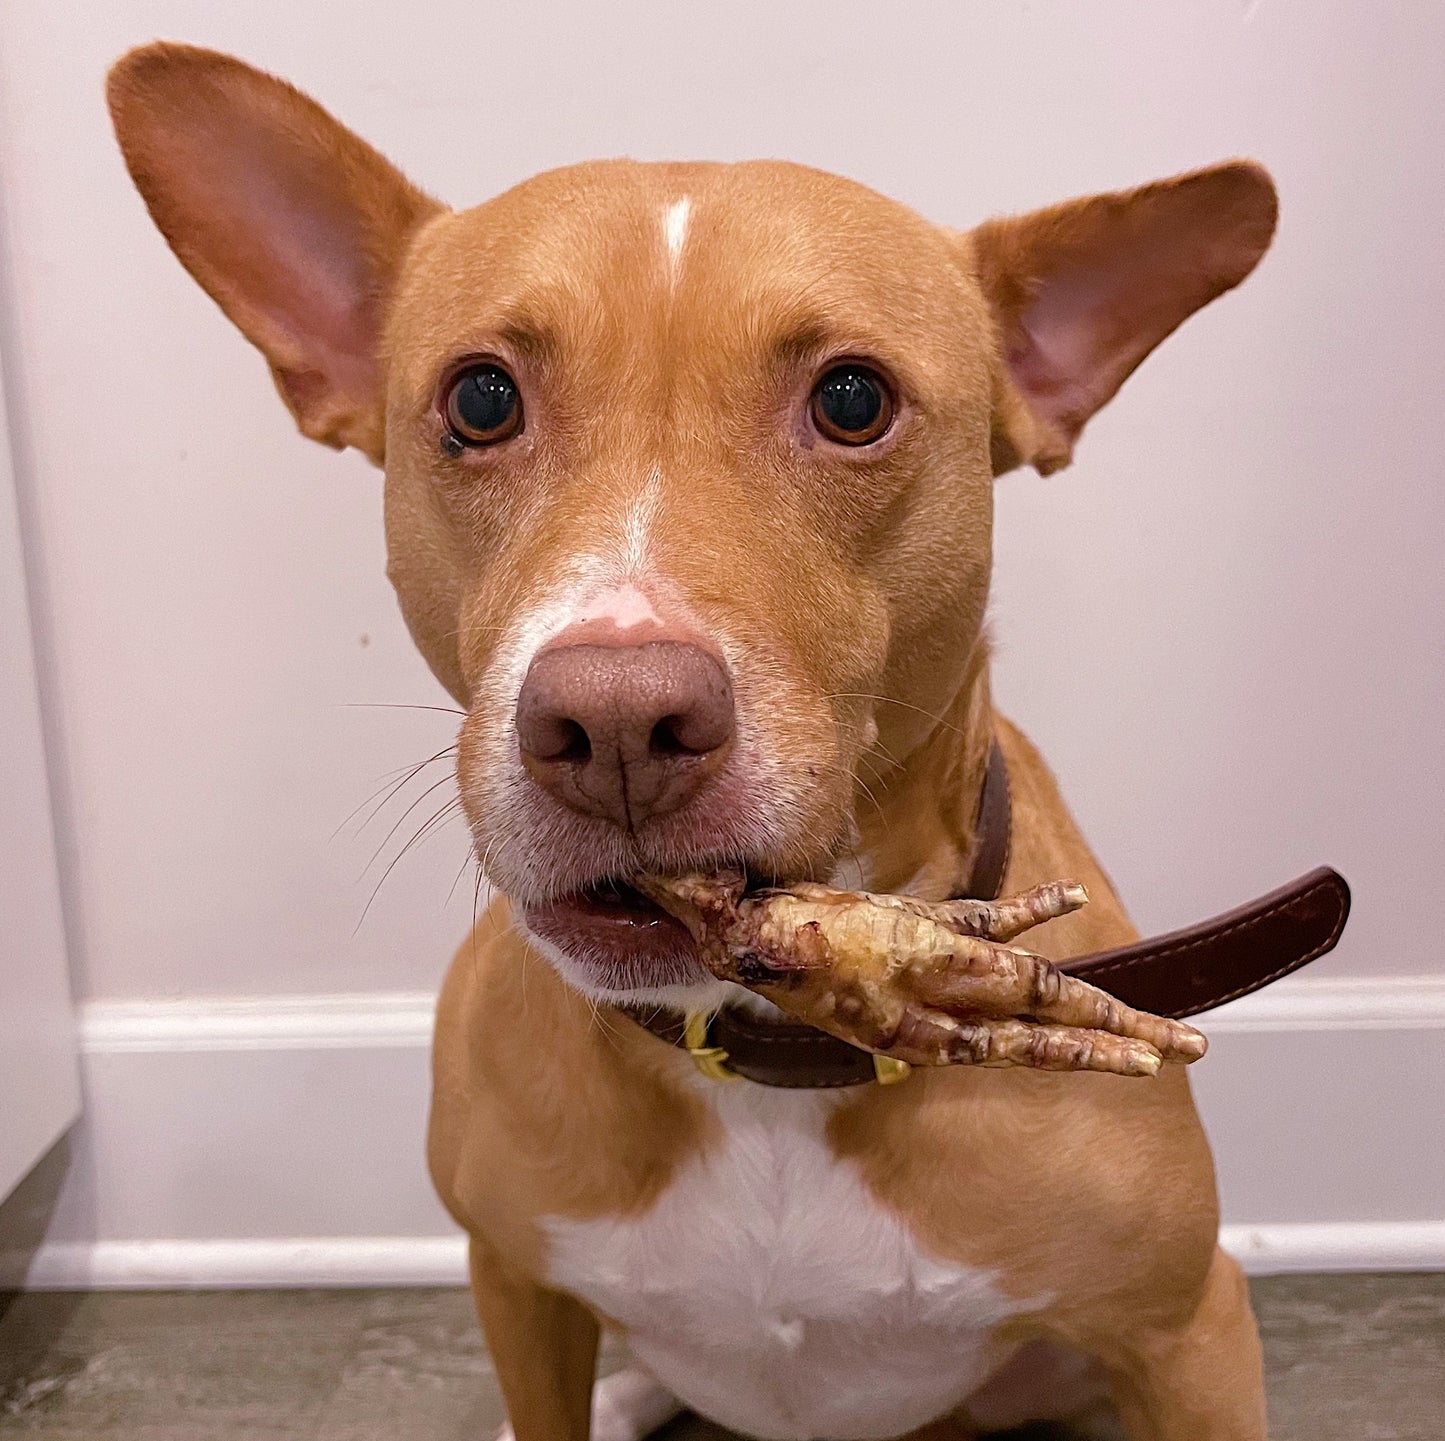 Our rescue dog, Momo, holding the chicken feet in her mouth.